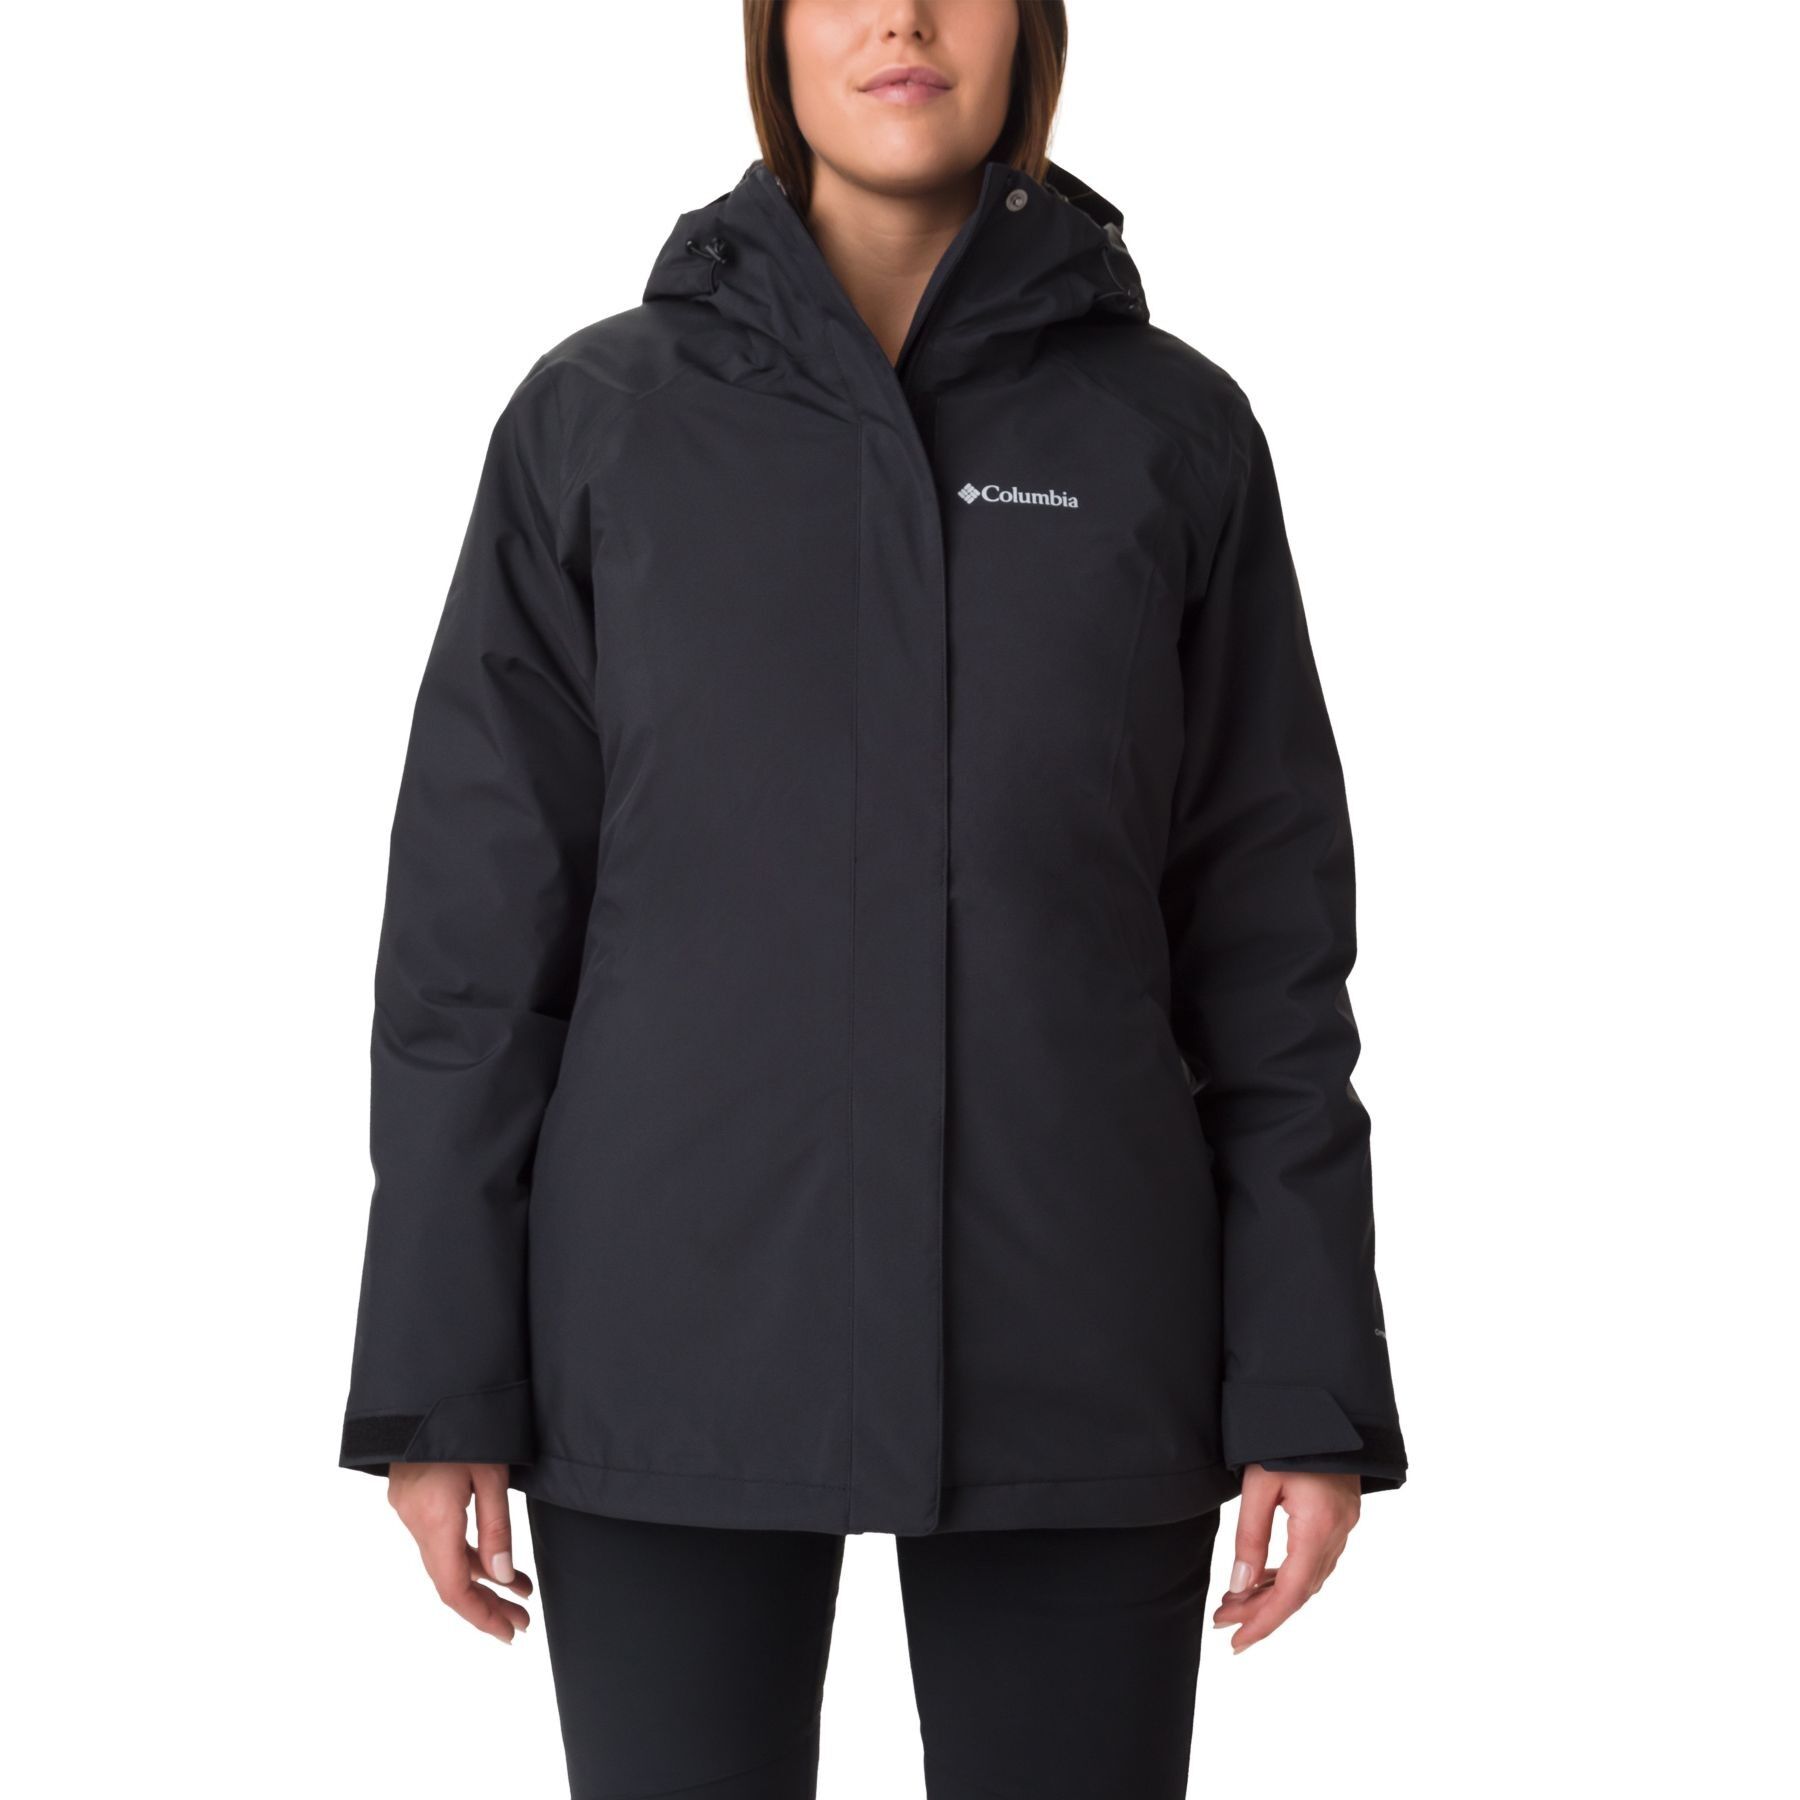 Columbia Tolt Track Interchange Jacket - Chaqueta impermeable - Mujer